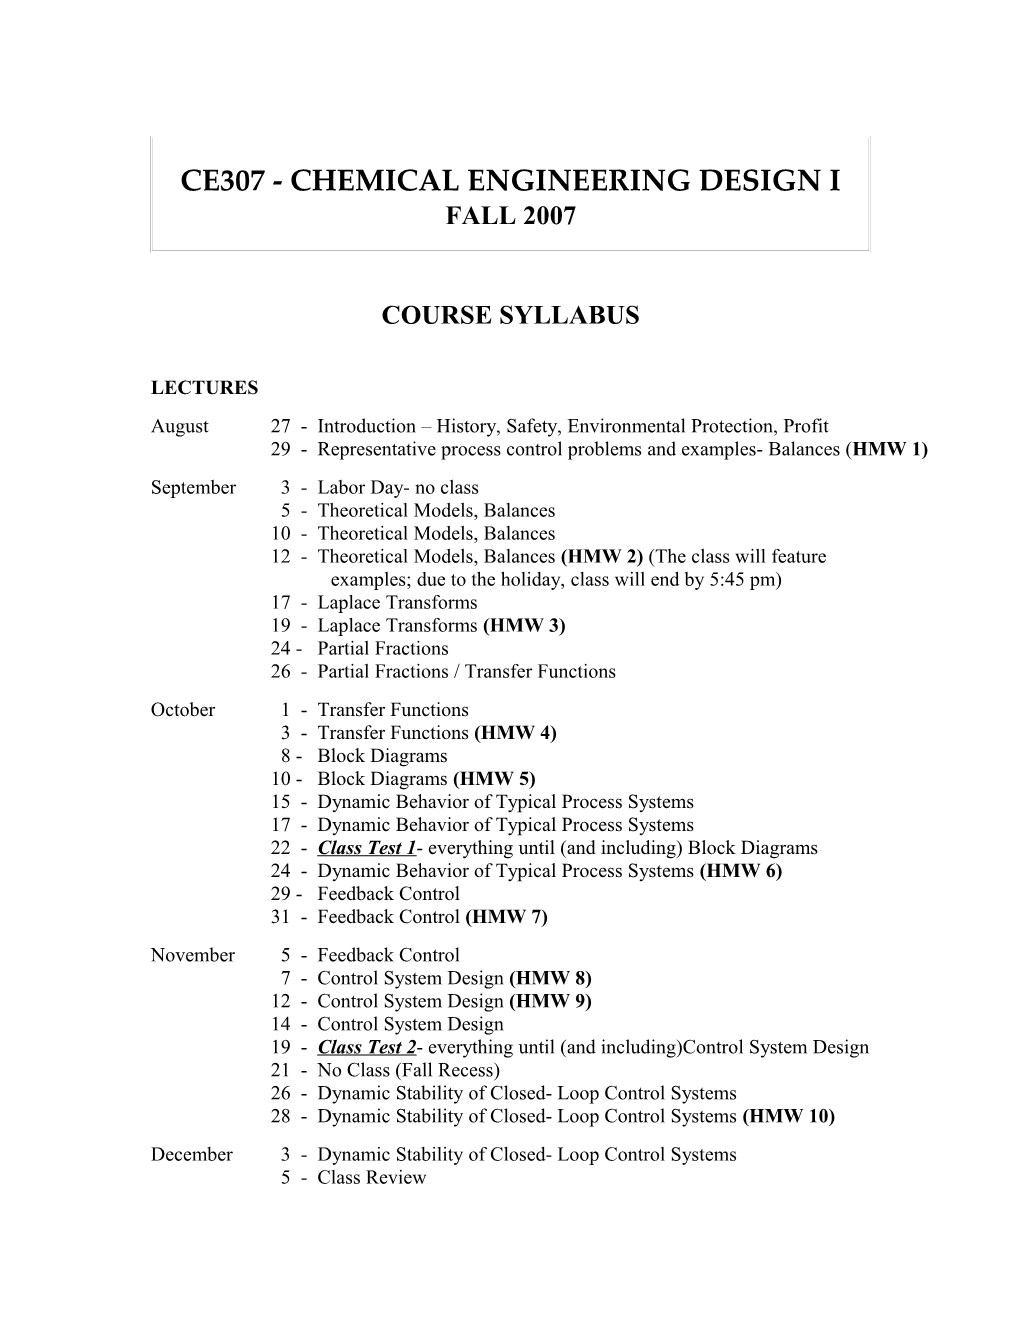 Ce307 - Chemical Engineering Design I